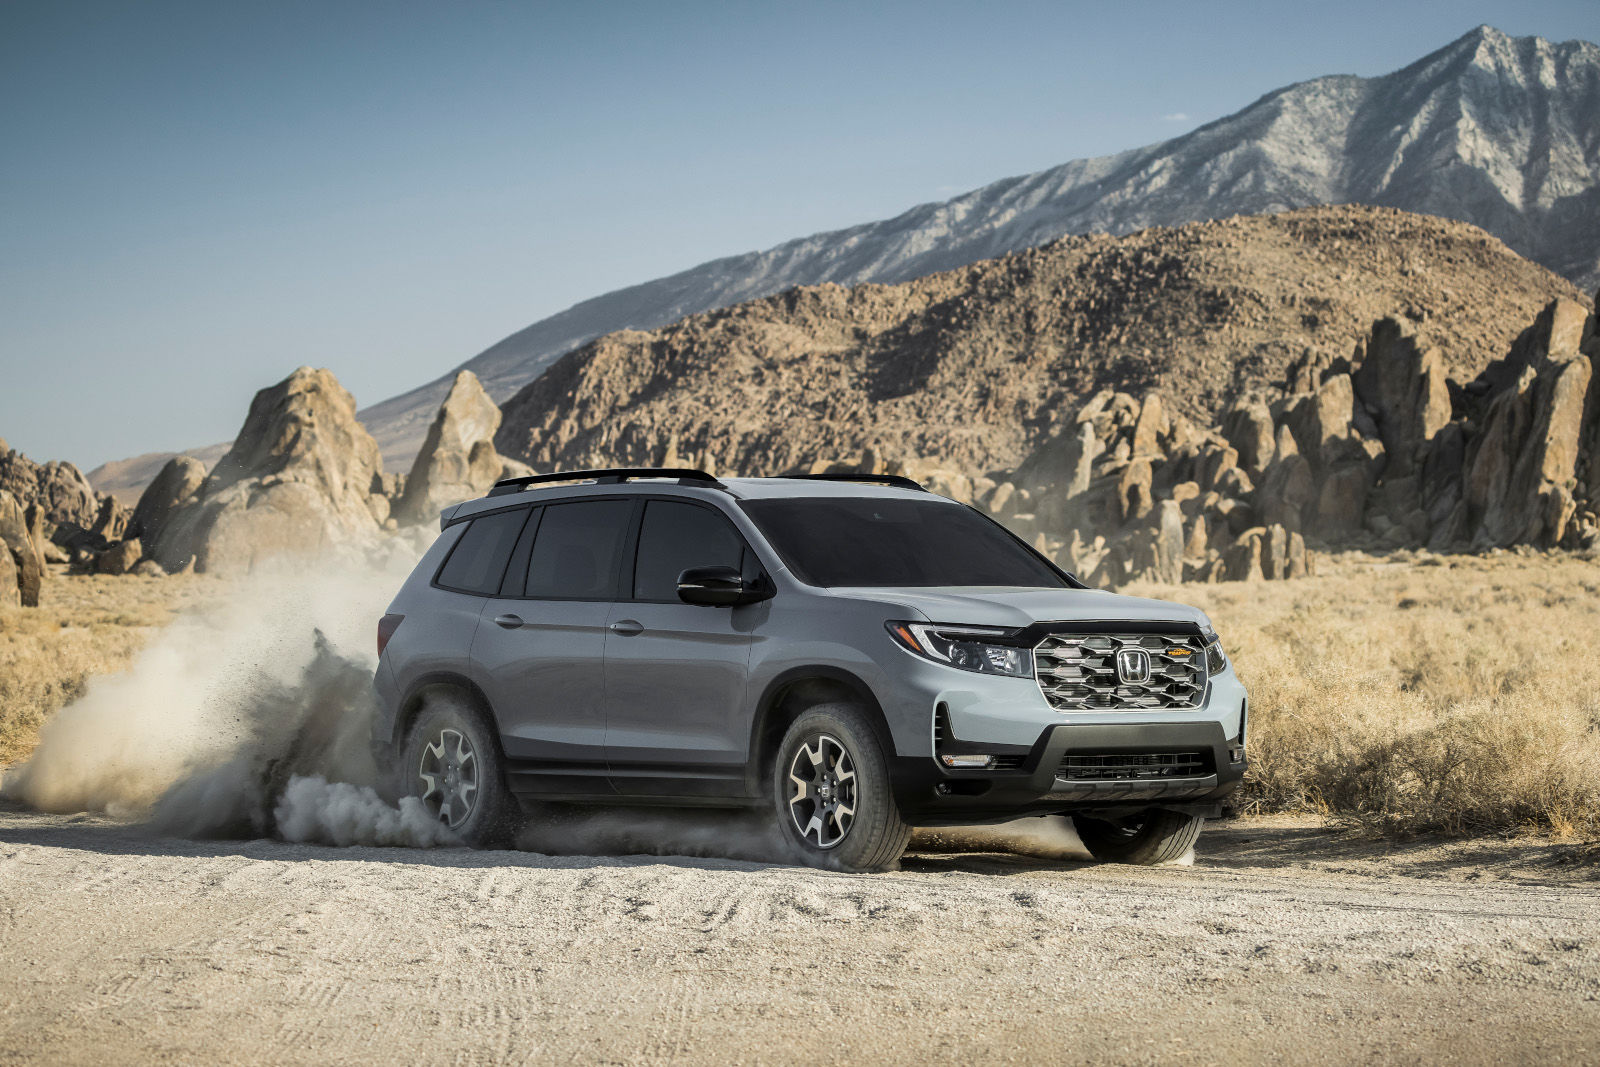 Honda Passport Secures Top Spot in Residual Value for Mid-Size 2-Row SUVs